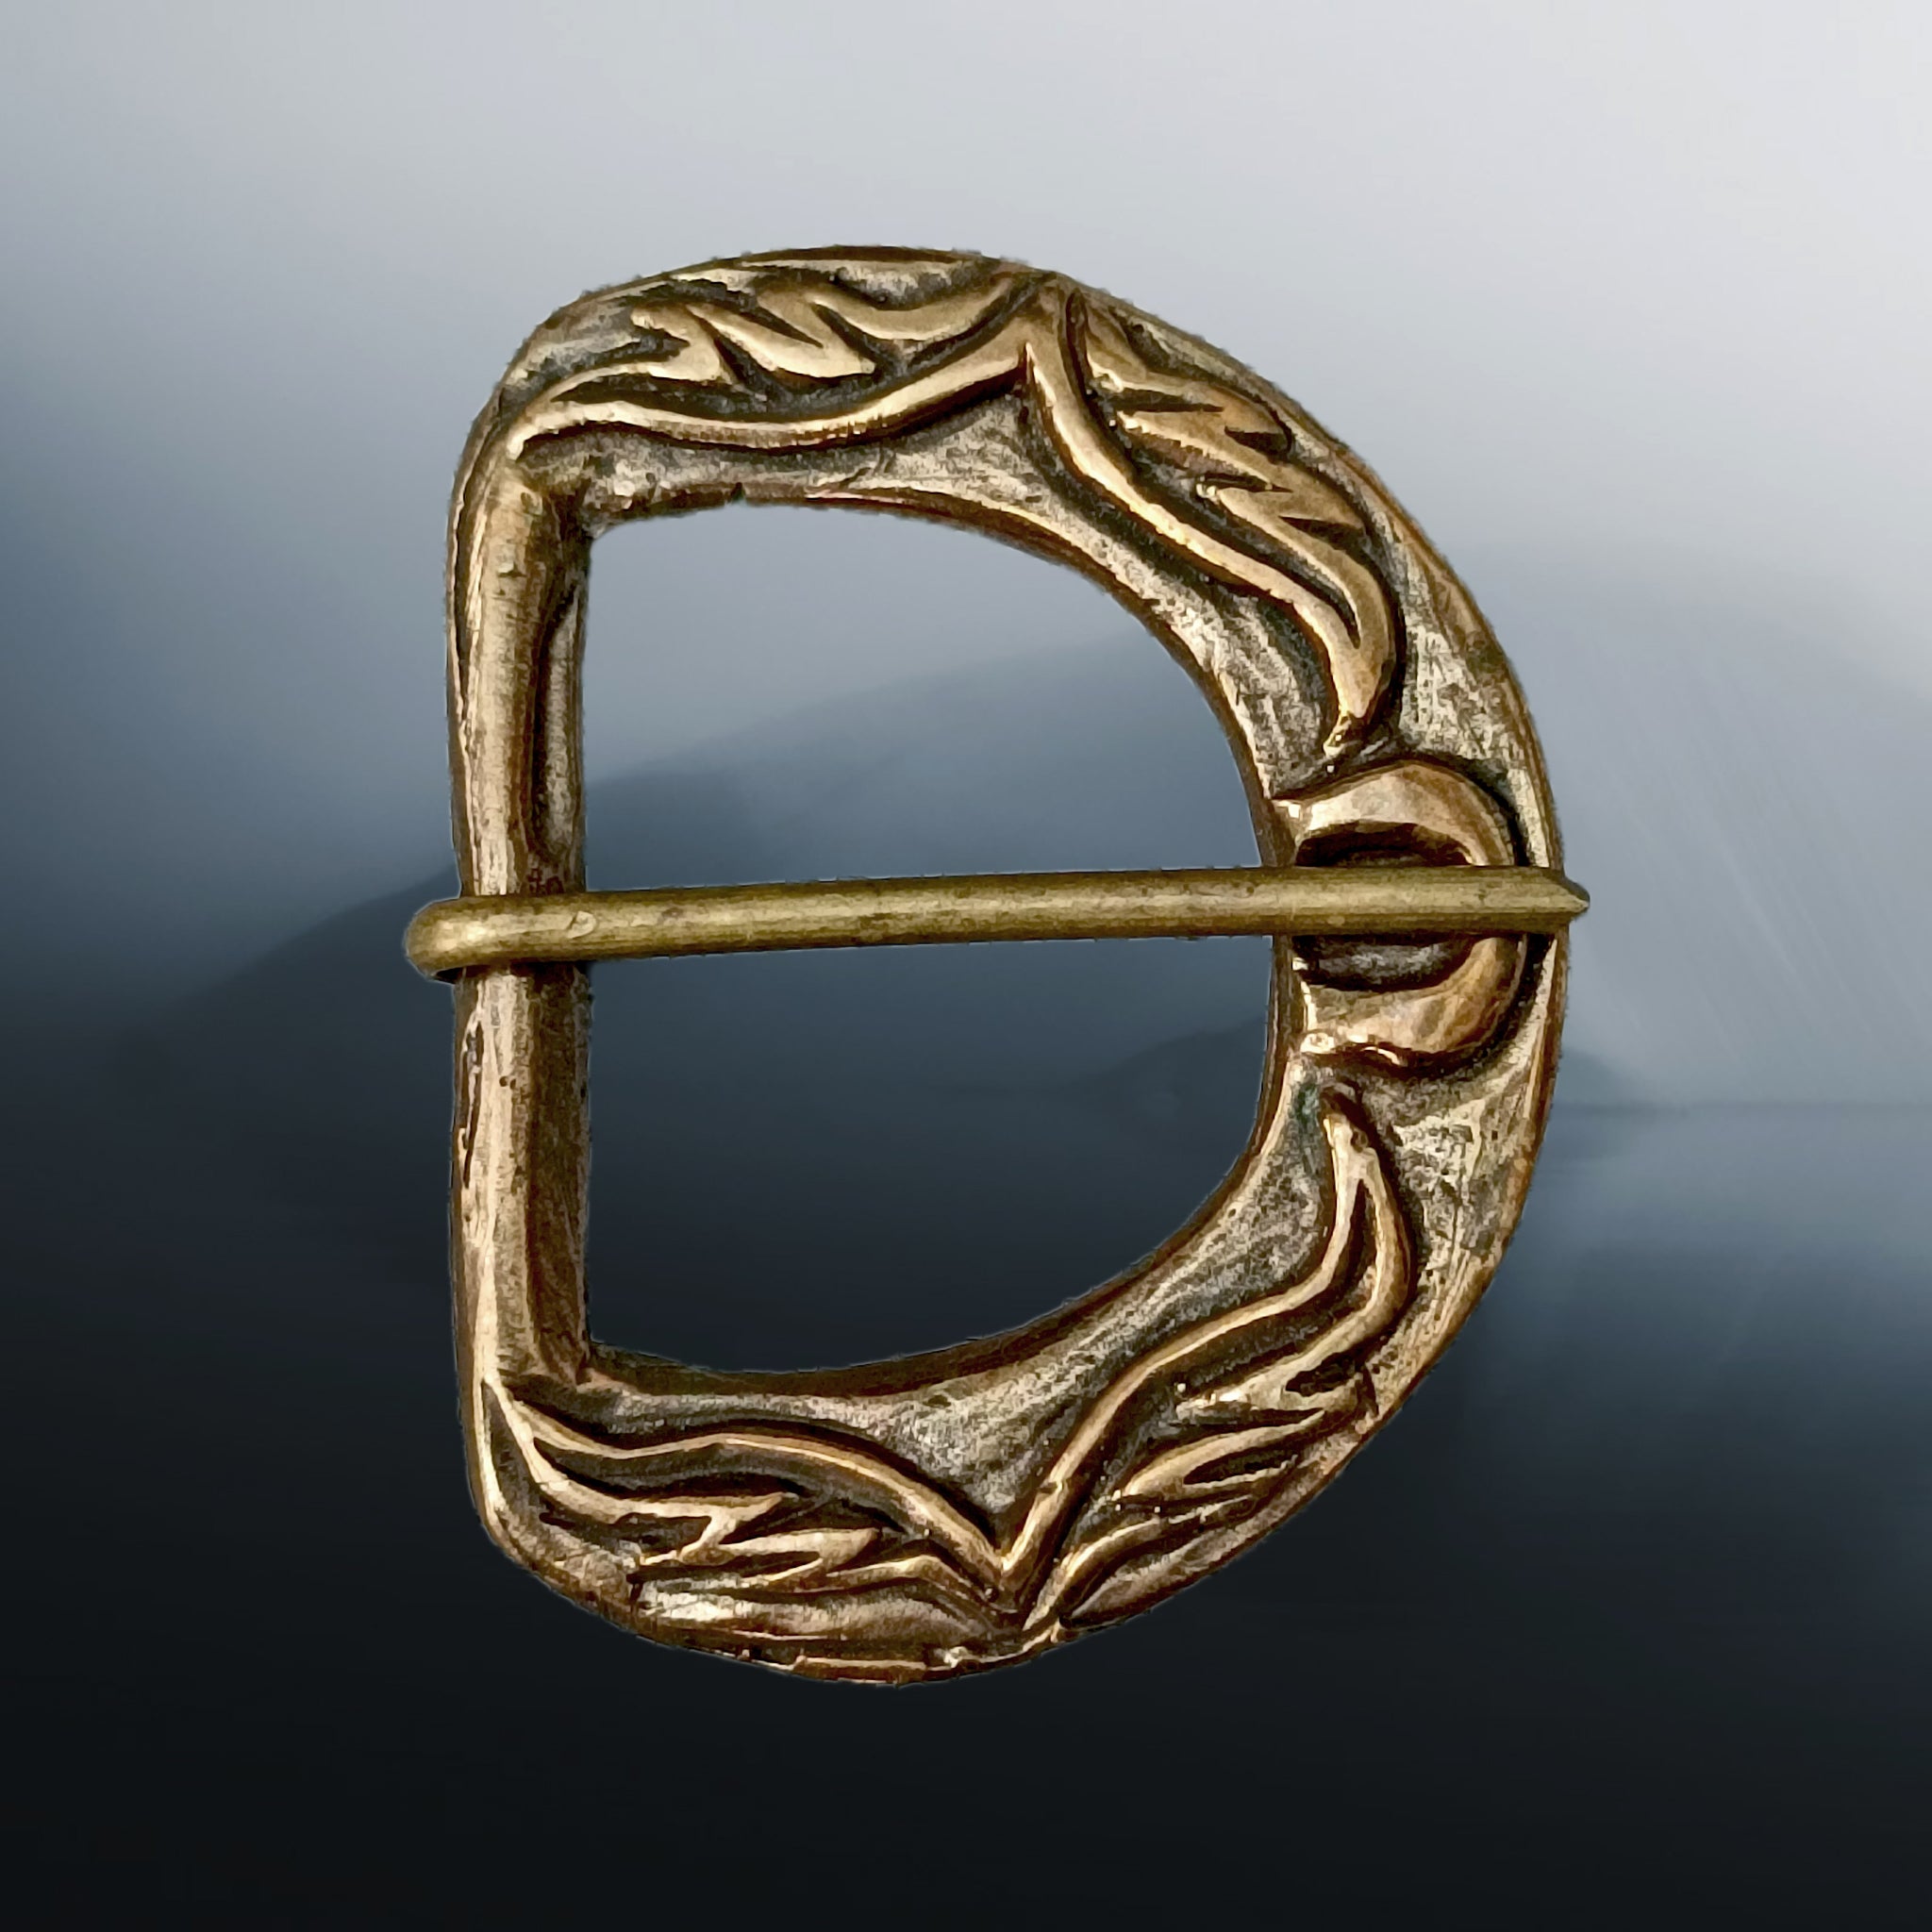 9th - 10th Century Bronze Viking Buckle from Ostra, Sweden